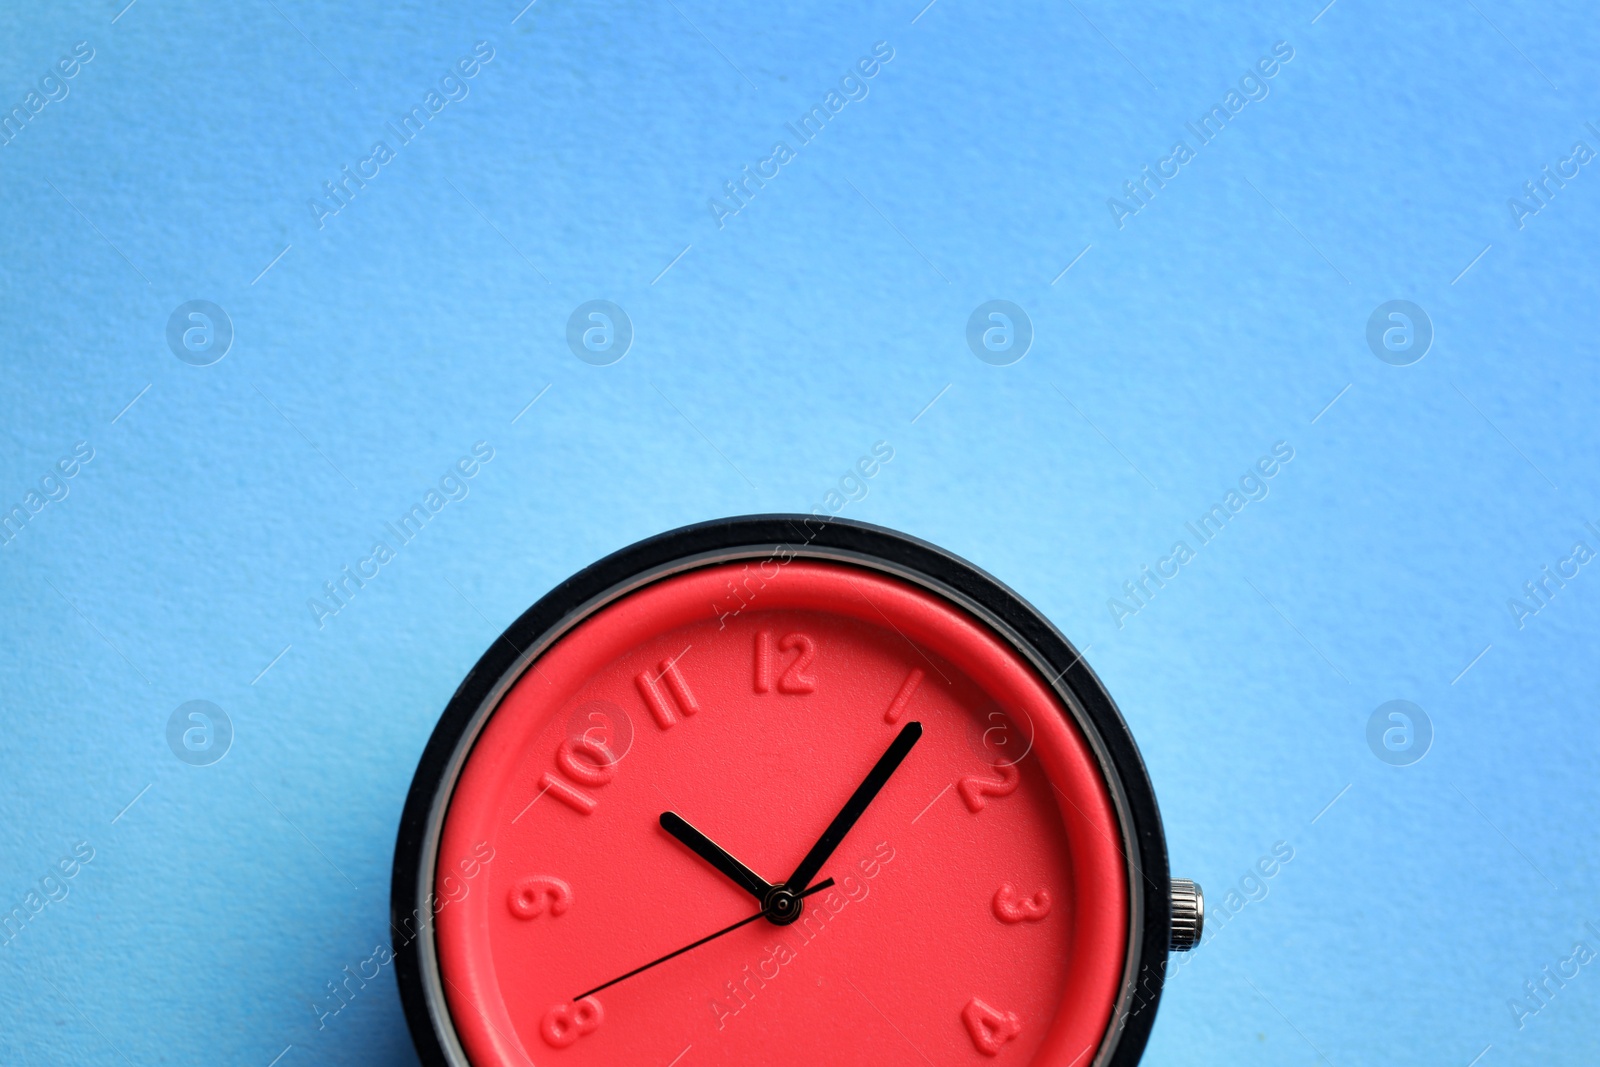 Photo of Stylish bright wrist watch on color background, top view with space for text. Fashion accessory